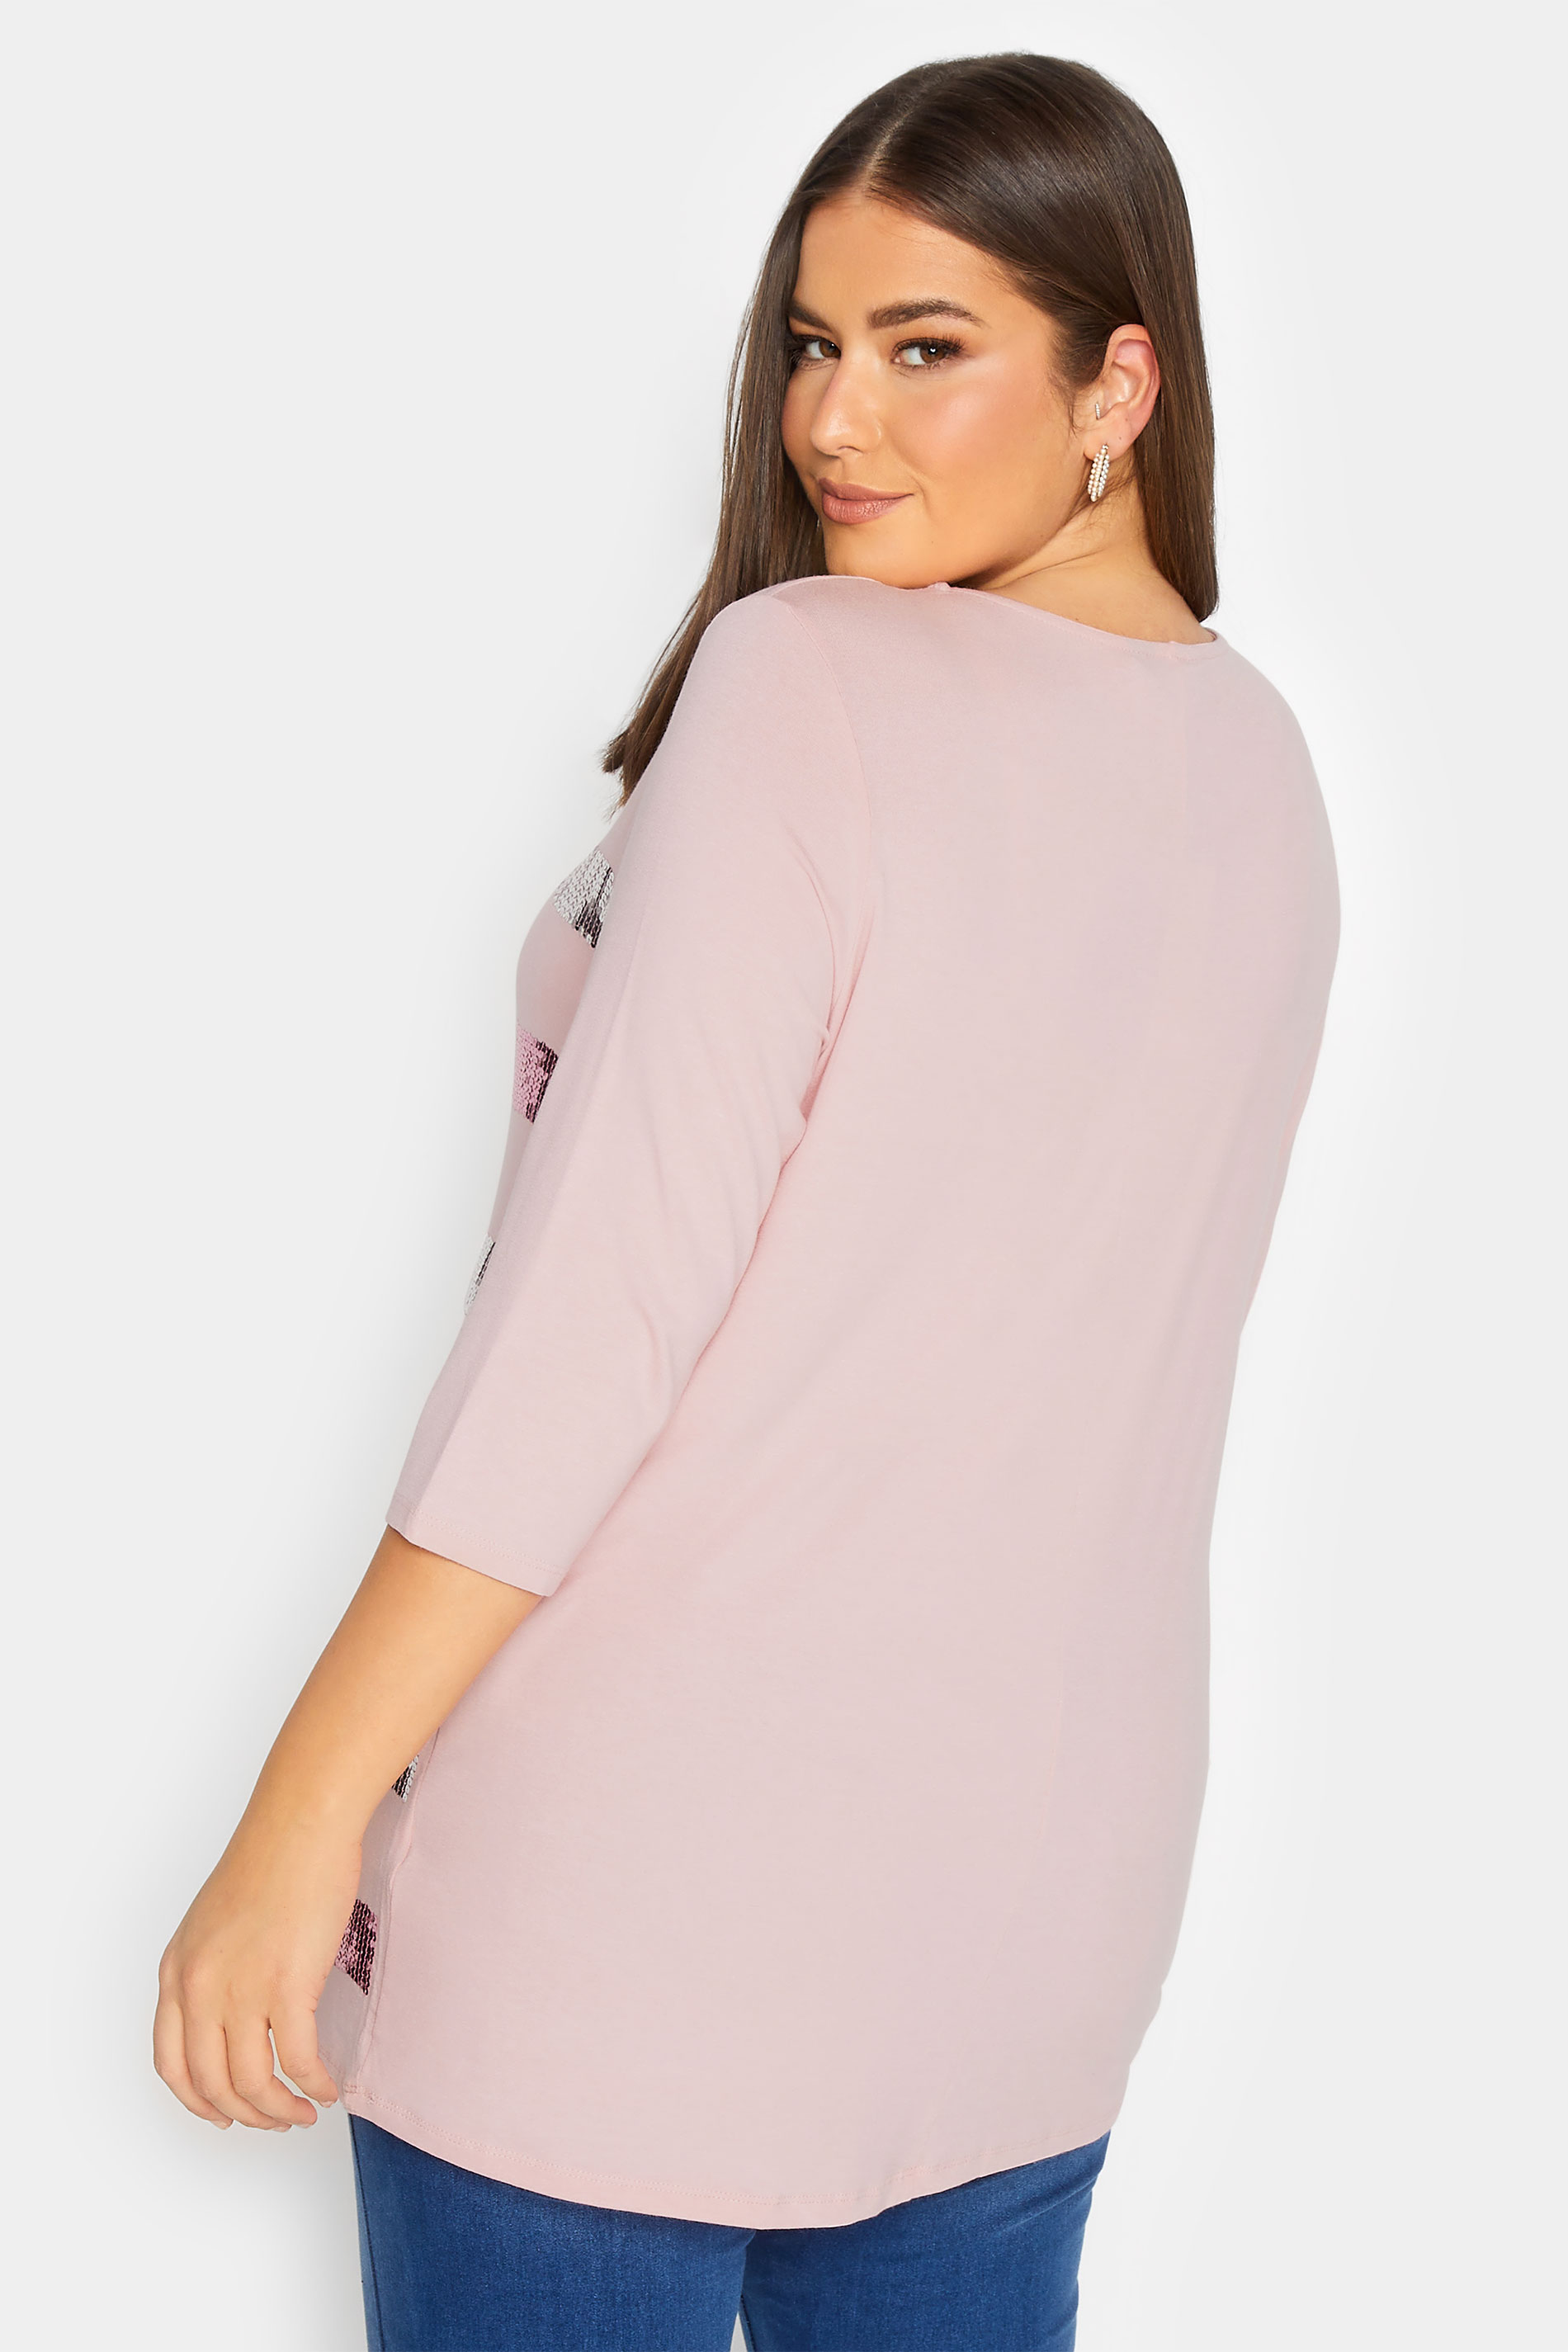 YOURS Plus Size Pink Sequin Stripe Top